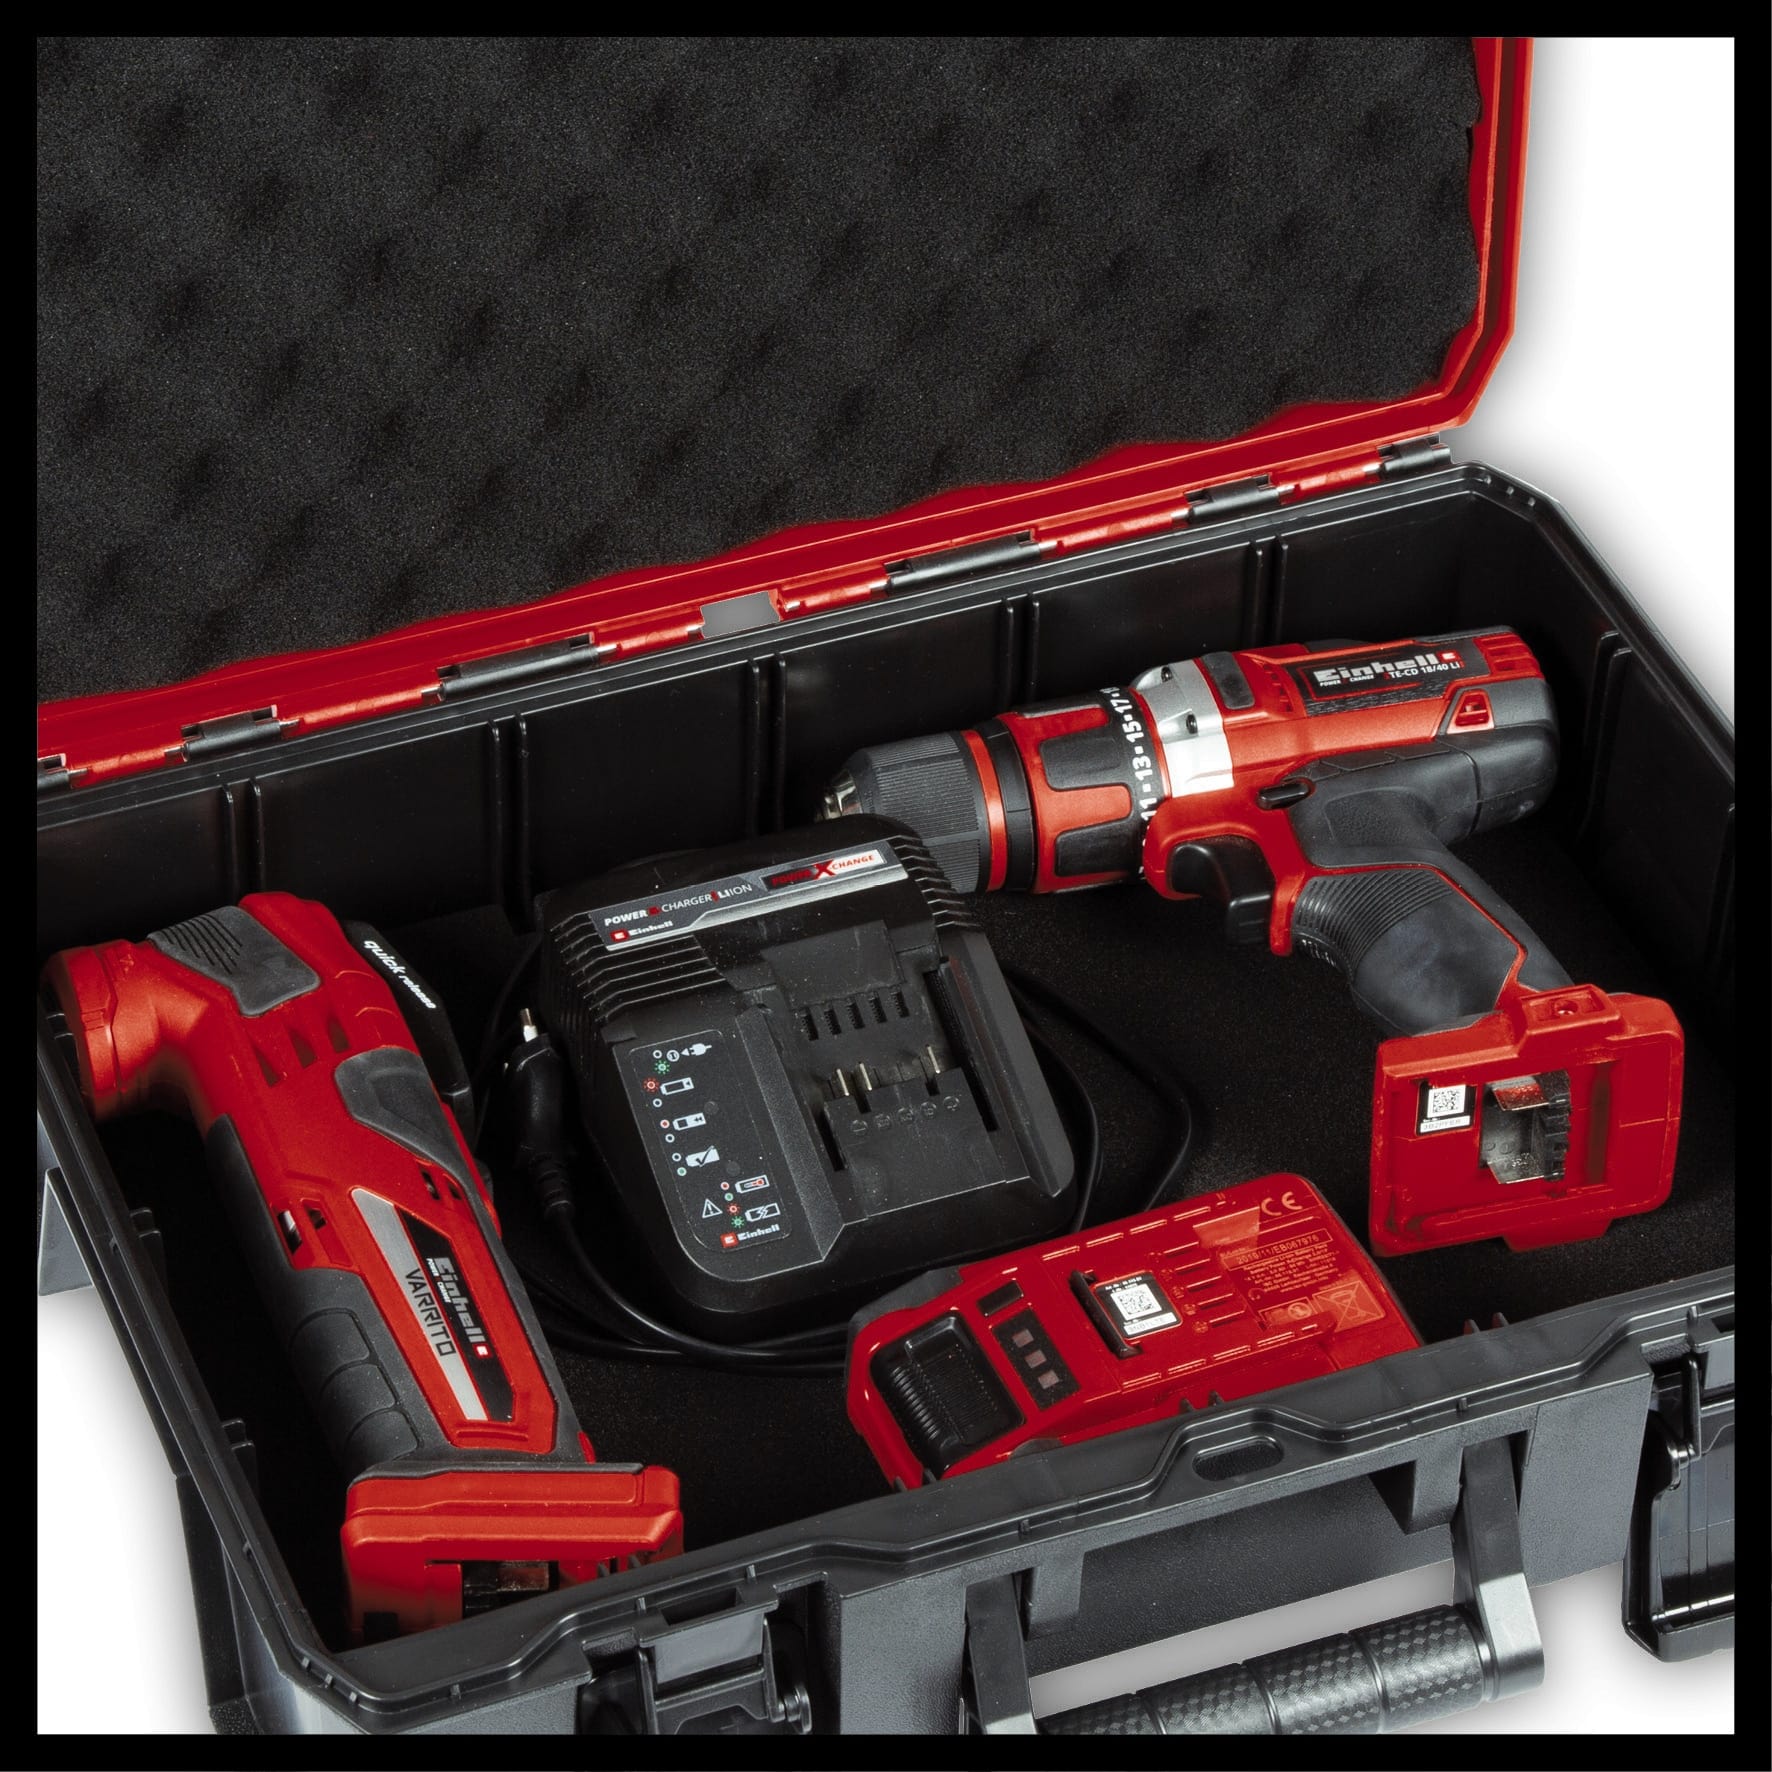 EINHELL Systemkoffer E-Case S-F inkl. grid foam